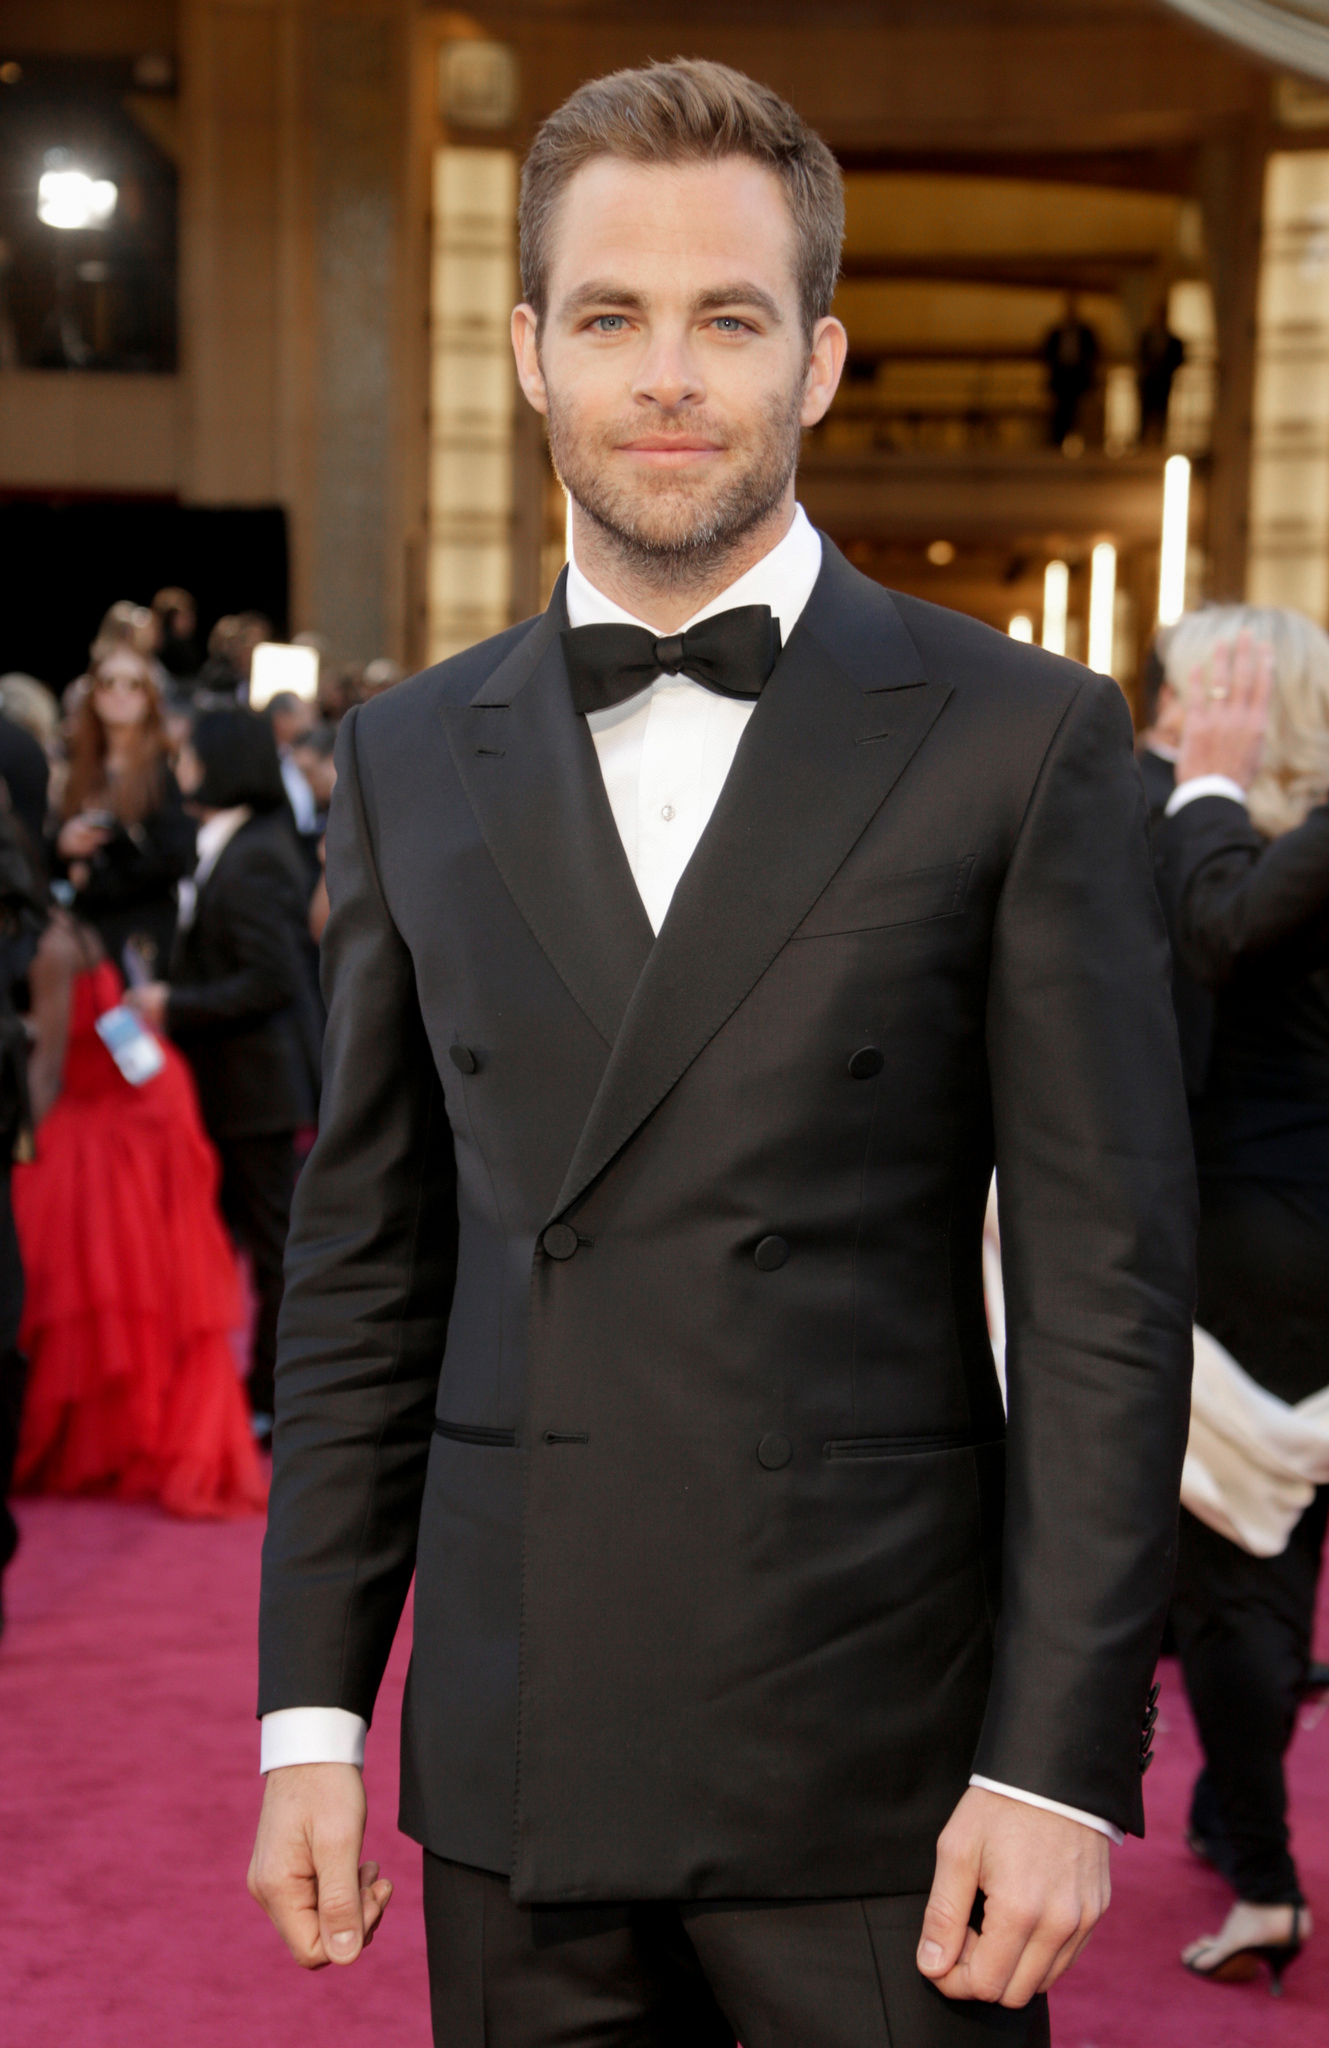 wearing double-breasted black suit with a black bow tie